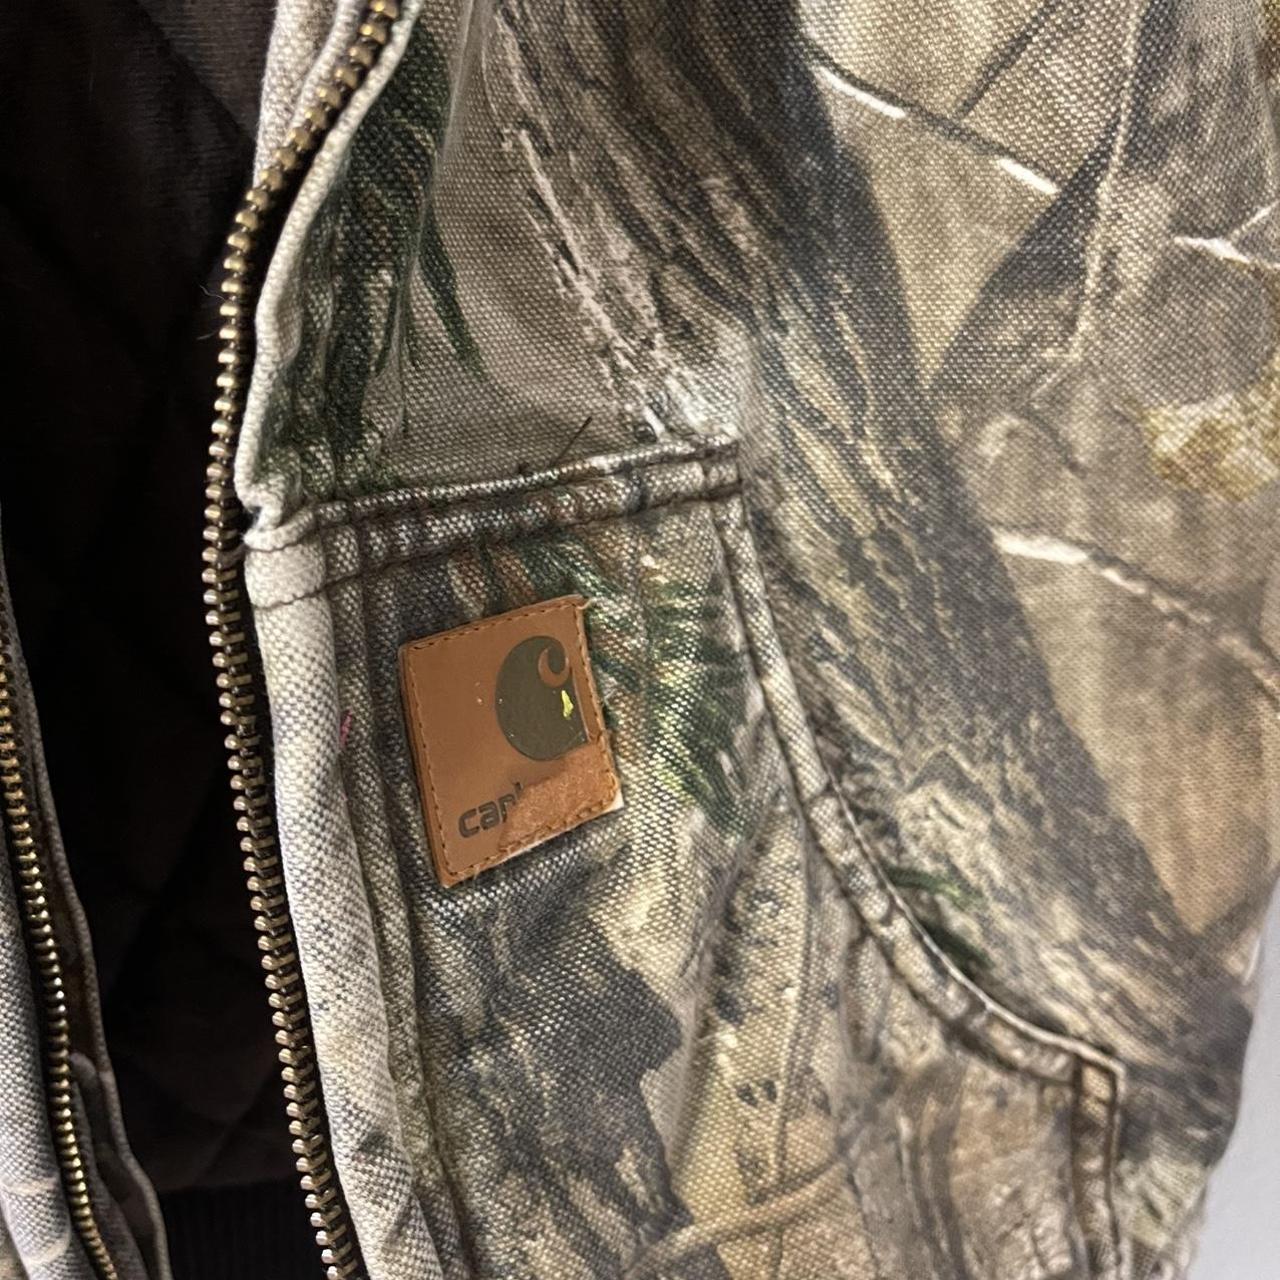 Carhartt Green and Brown Jacket (4)